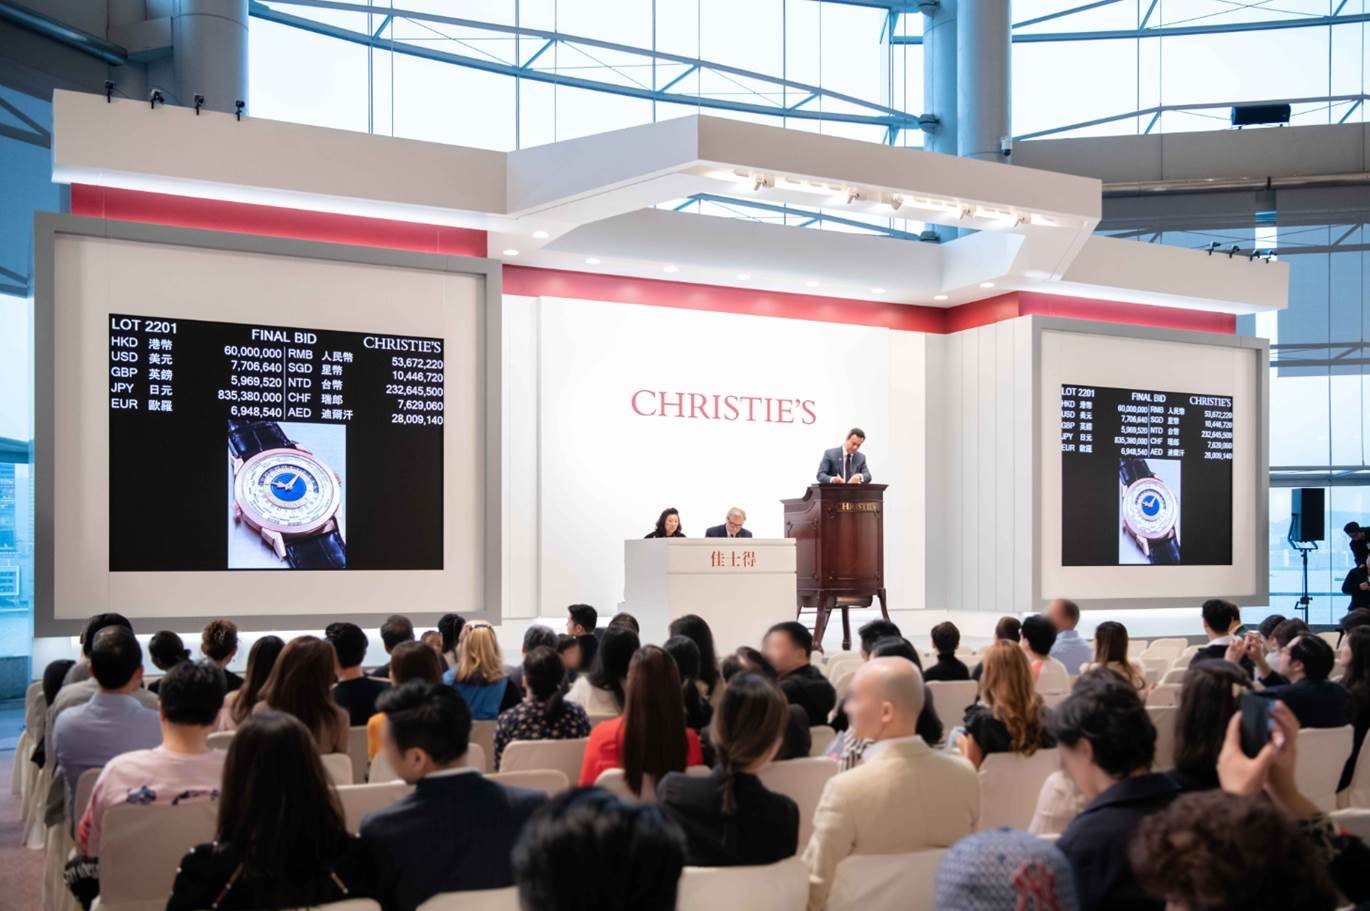 Christie’s Hong Kong sold a Patek Philippe ‘L’Heure Bleue’ Ref. 2523 wristwatch, which realised a price of HK$70,175,000 (US$9,013,623) – becoming the most expensive wristwatch ever to be auctioned in Asia. Photo: Christie's